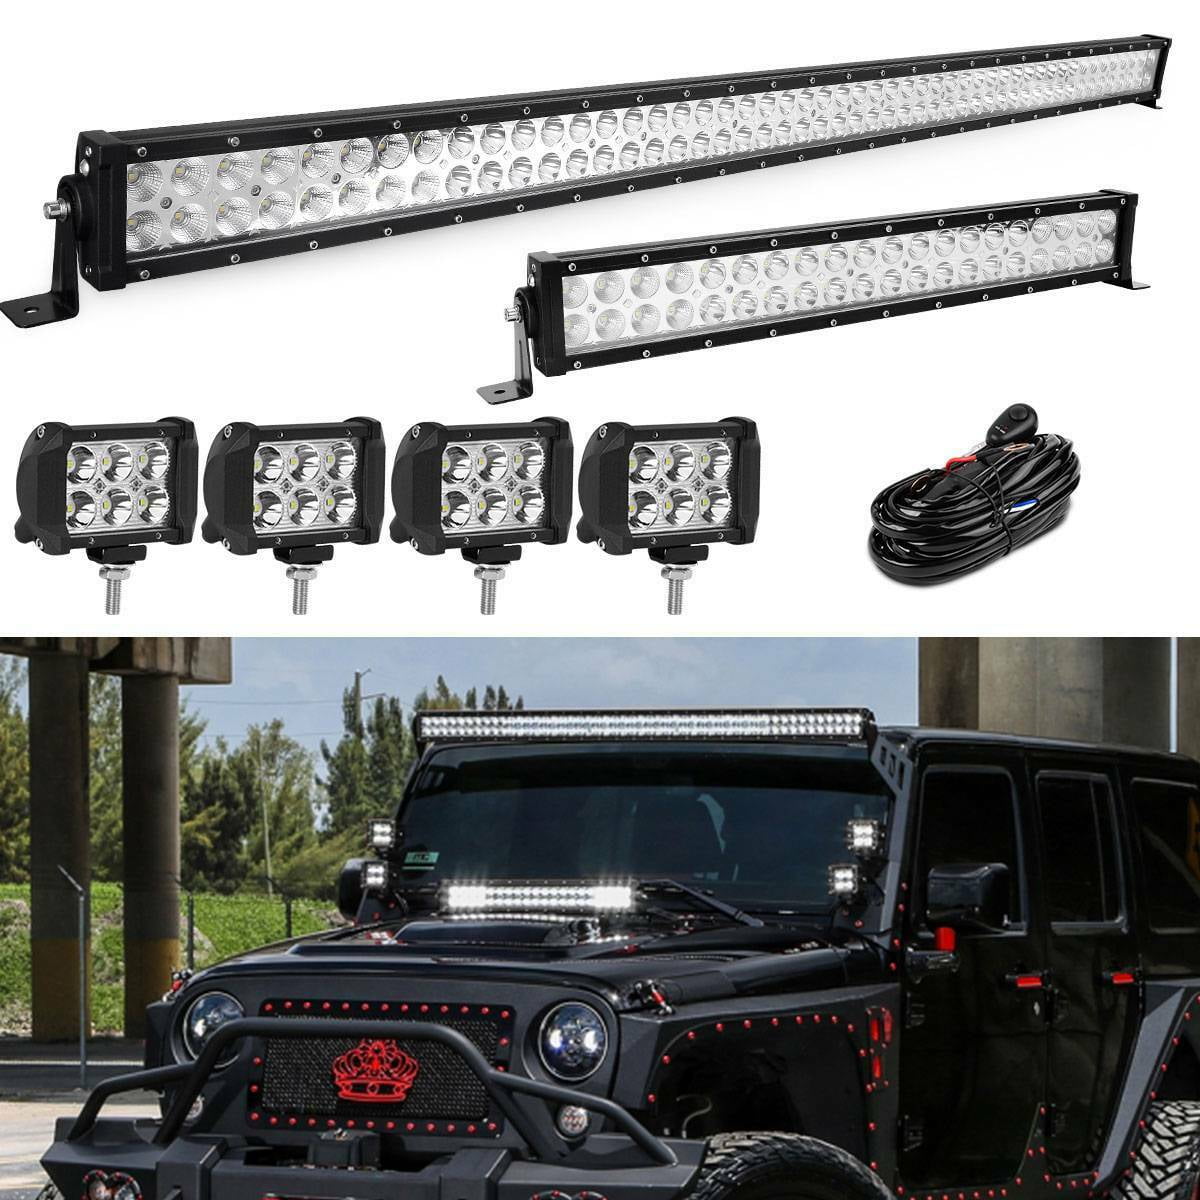 52"in 300W Combo Led Light Bar+22"inch 120W 4X 18W 4"Cube Pods+2pcs Wiring Kit